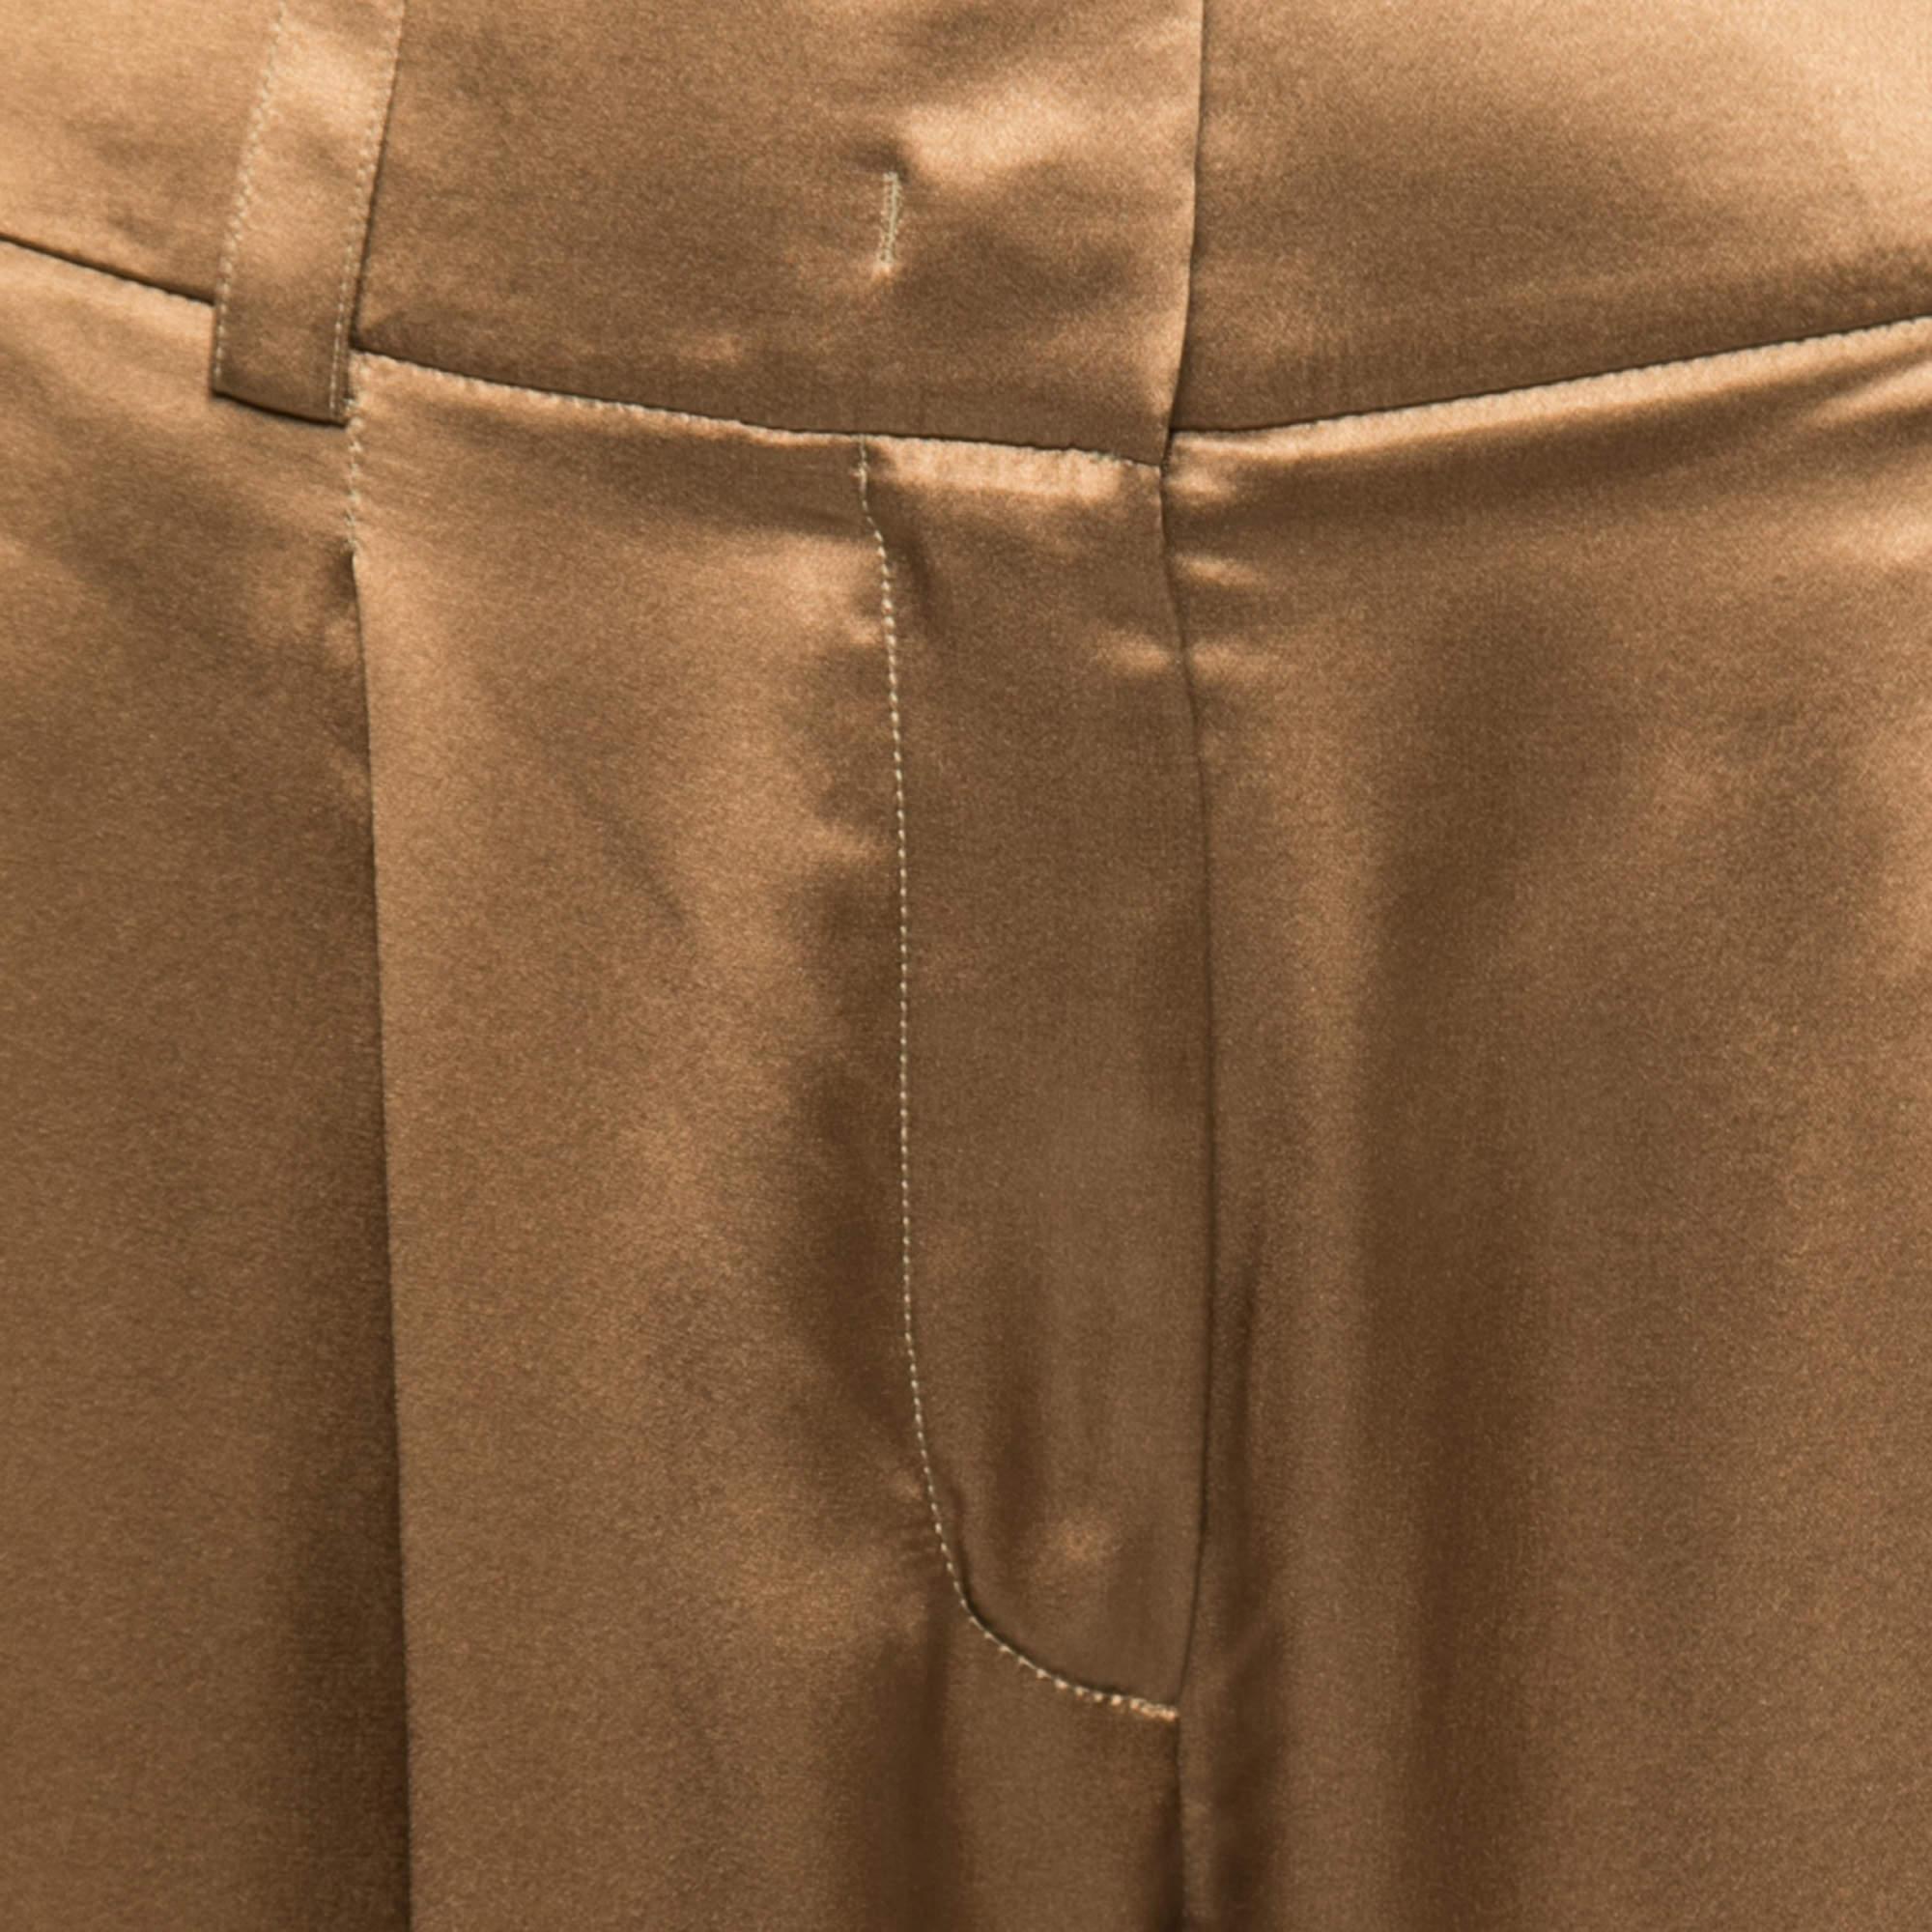 The smooth finished feel of these satin silk-tailored trousers from Givenchy will lend a posh appeal to your attire and keep you comfortable. They flaunt a brown hue, hook closure, and pleated formations. They equip four pockets. Make a fashion